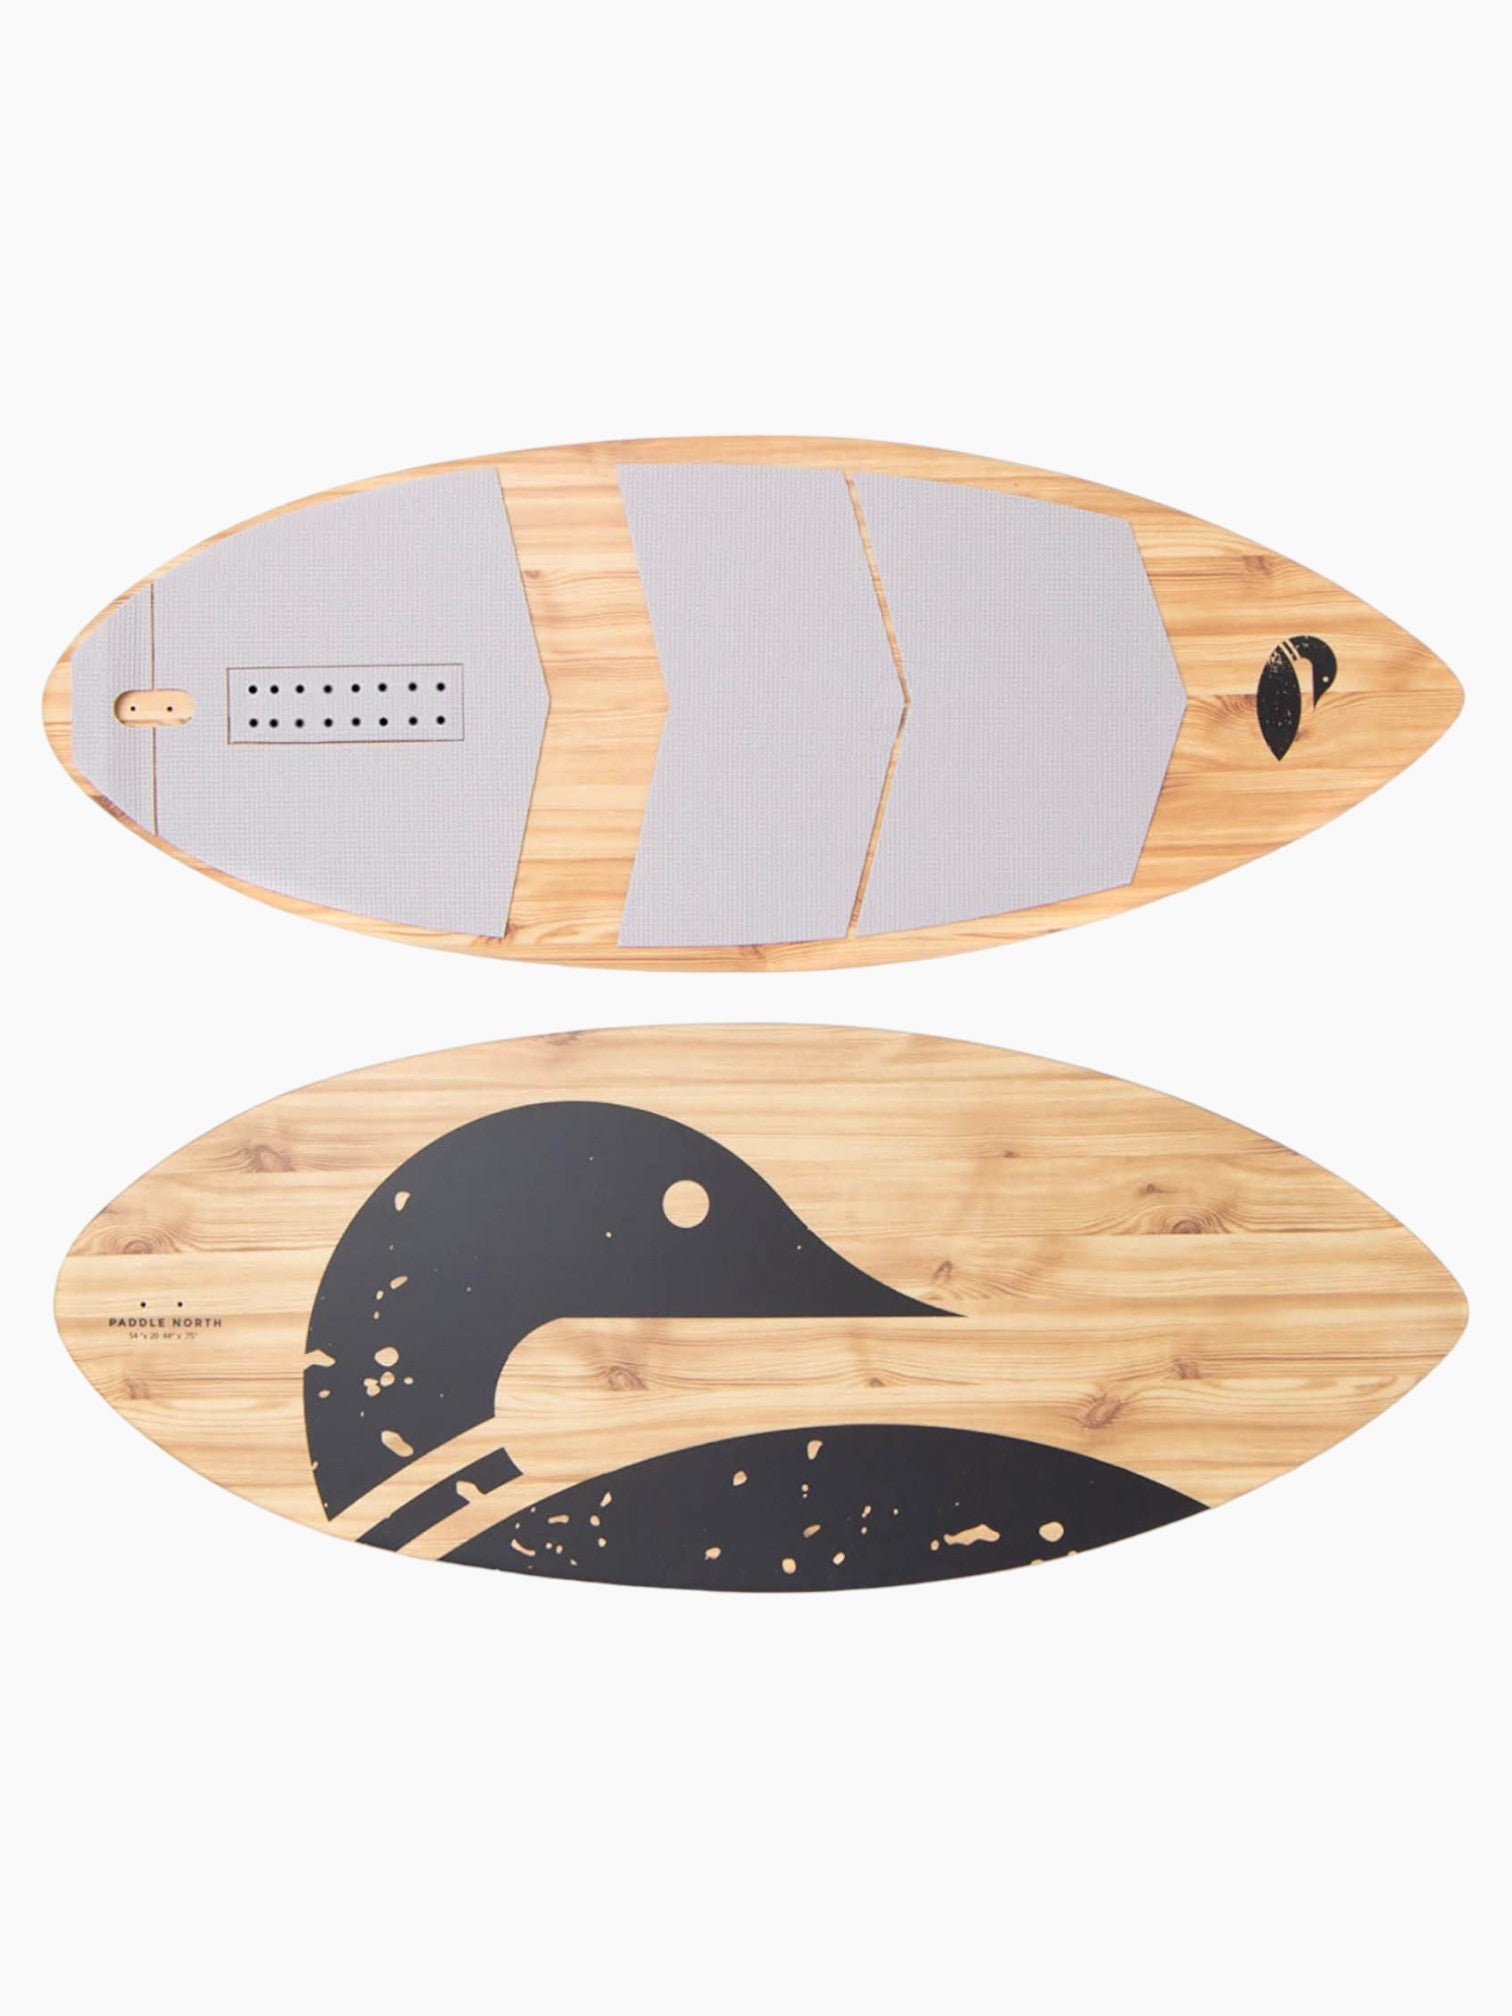 Photos of the front and back of a wooden lake surfer.